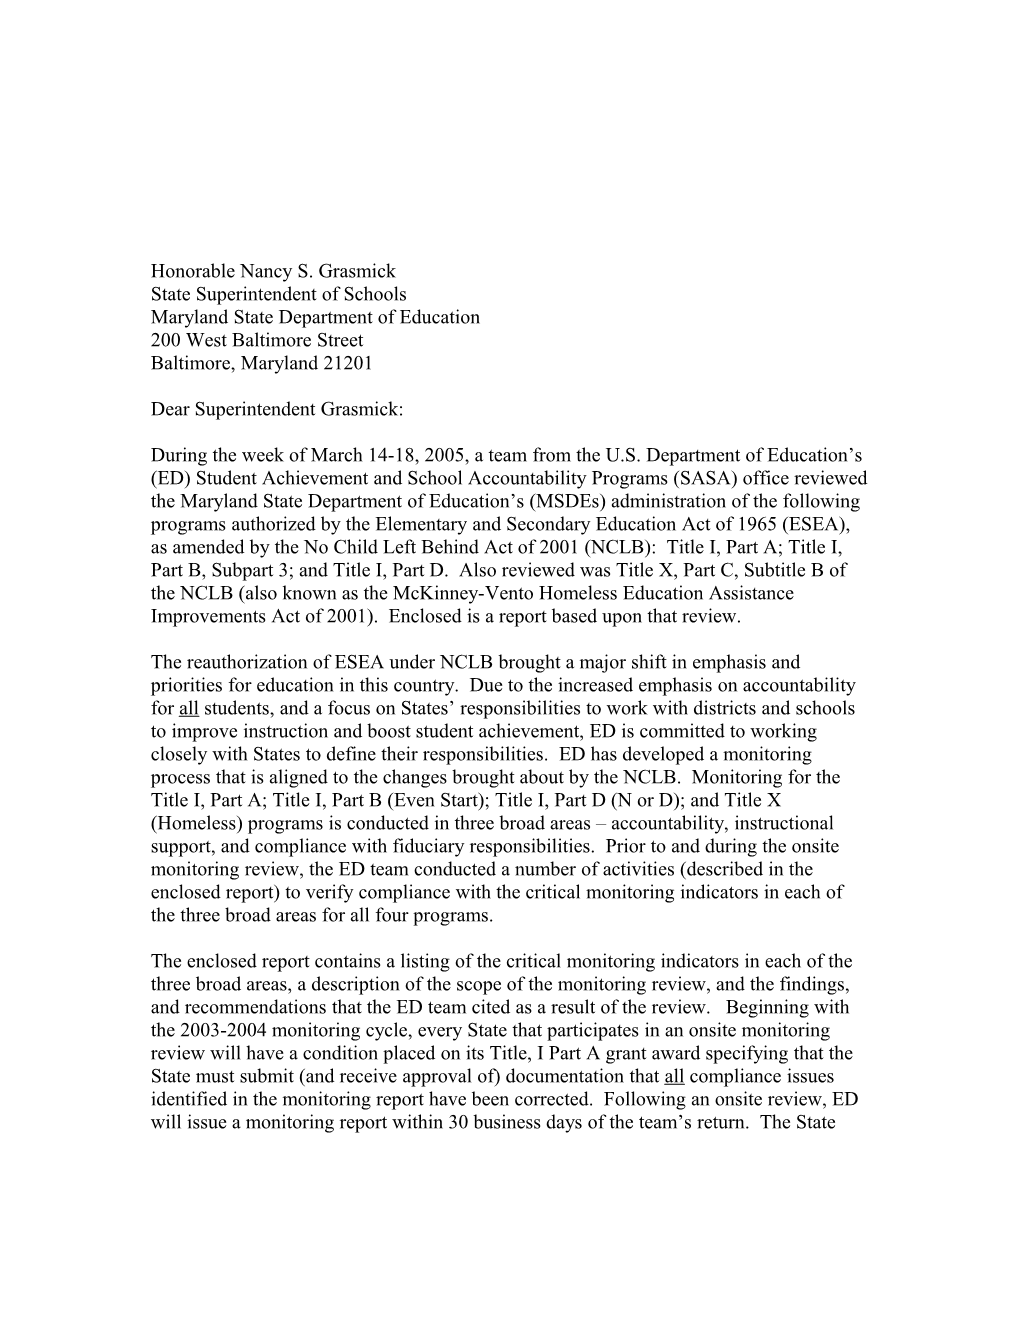 Maryland Letter and Monitoring Report, March 18, 2005 (MS Word)